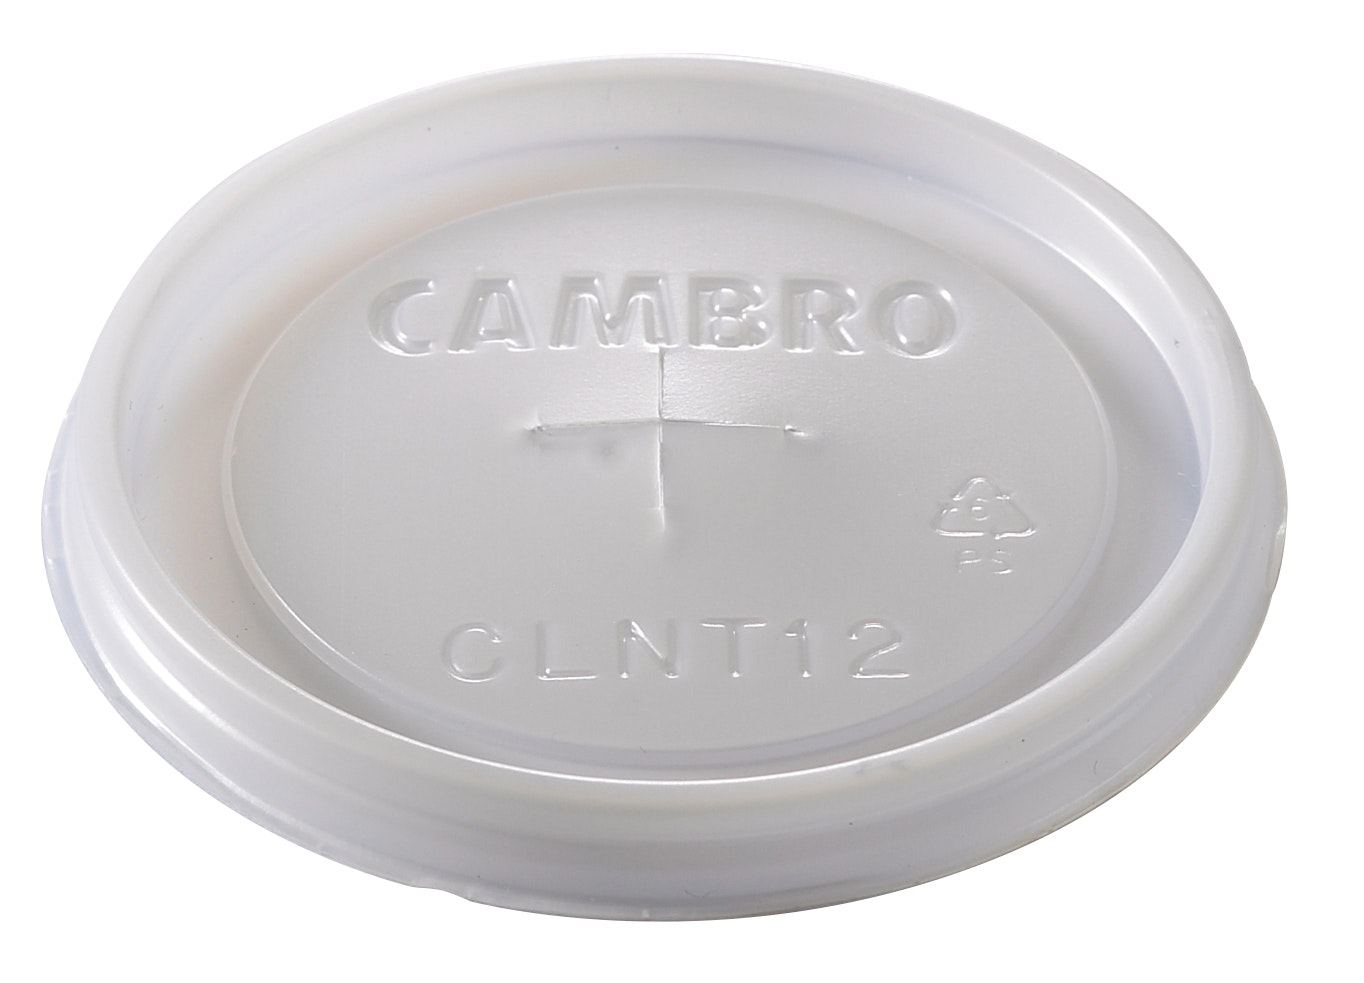 https://cambro-dam.imgix.net/PU0DO3EZ/as/phfiic-awqf0w-3q390i/CLNT12190_Disposable_Translucent_126_oz_Lid_for_Newport_Tumblers.jpg?dl